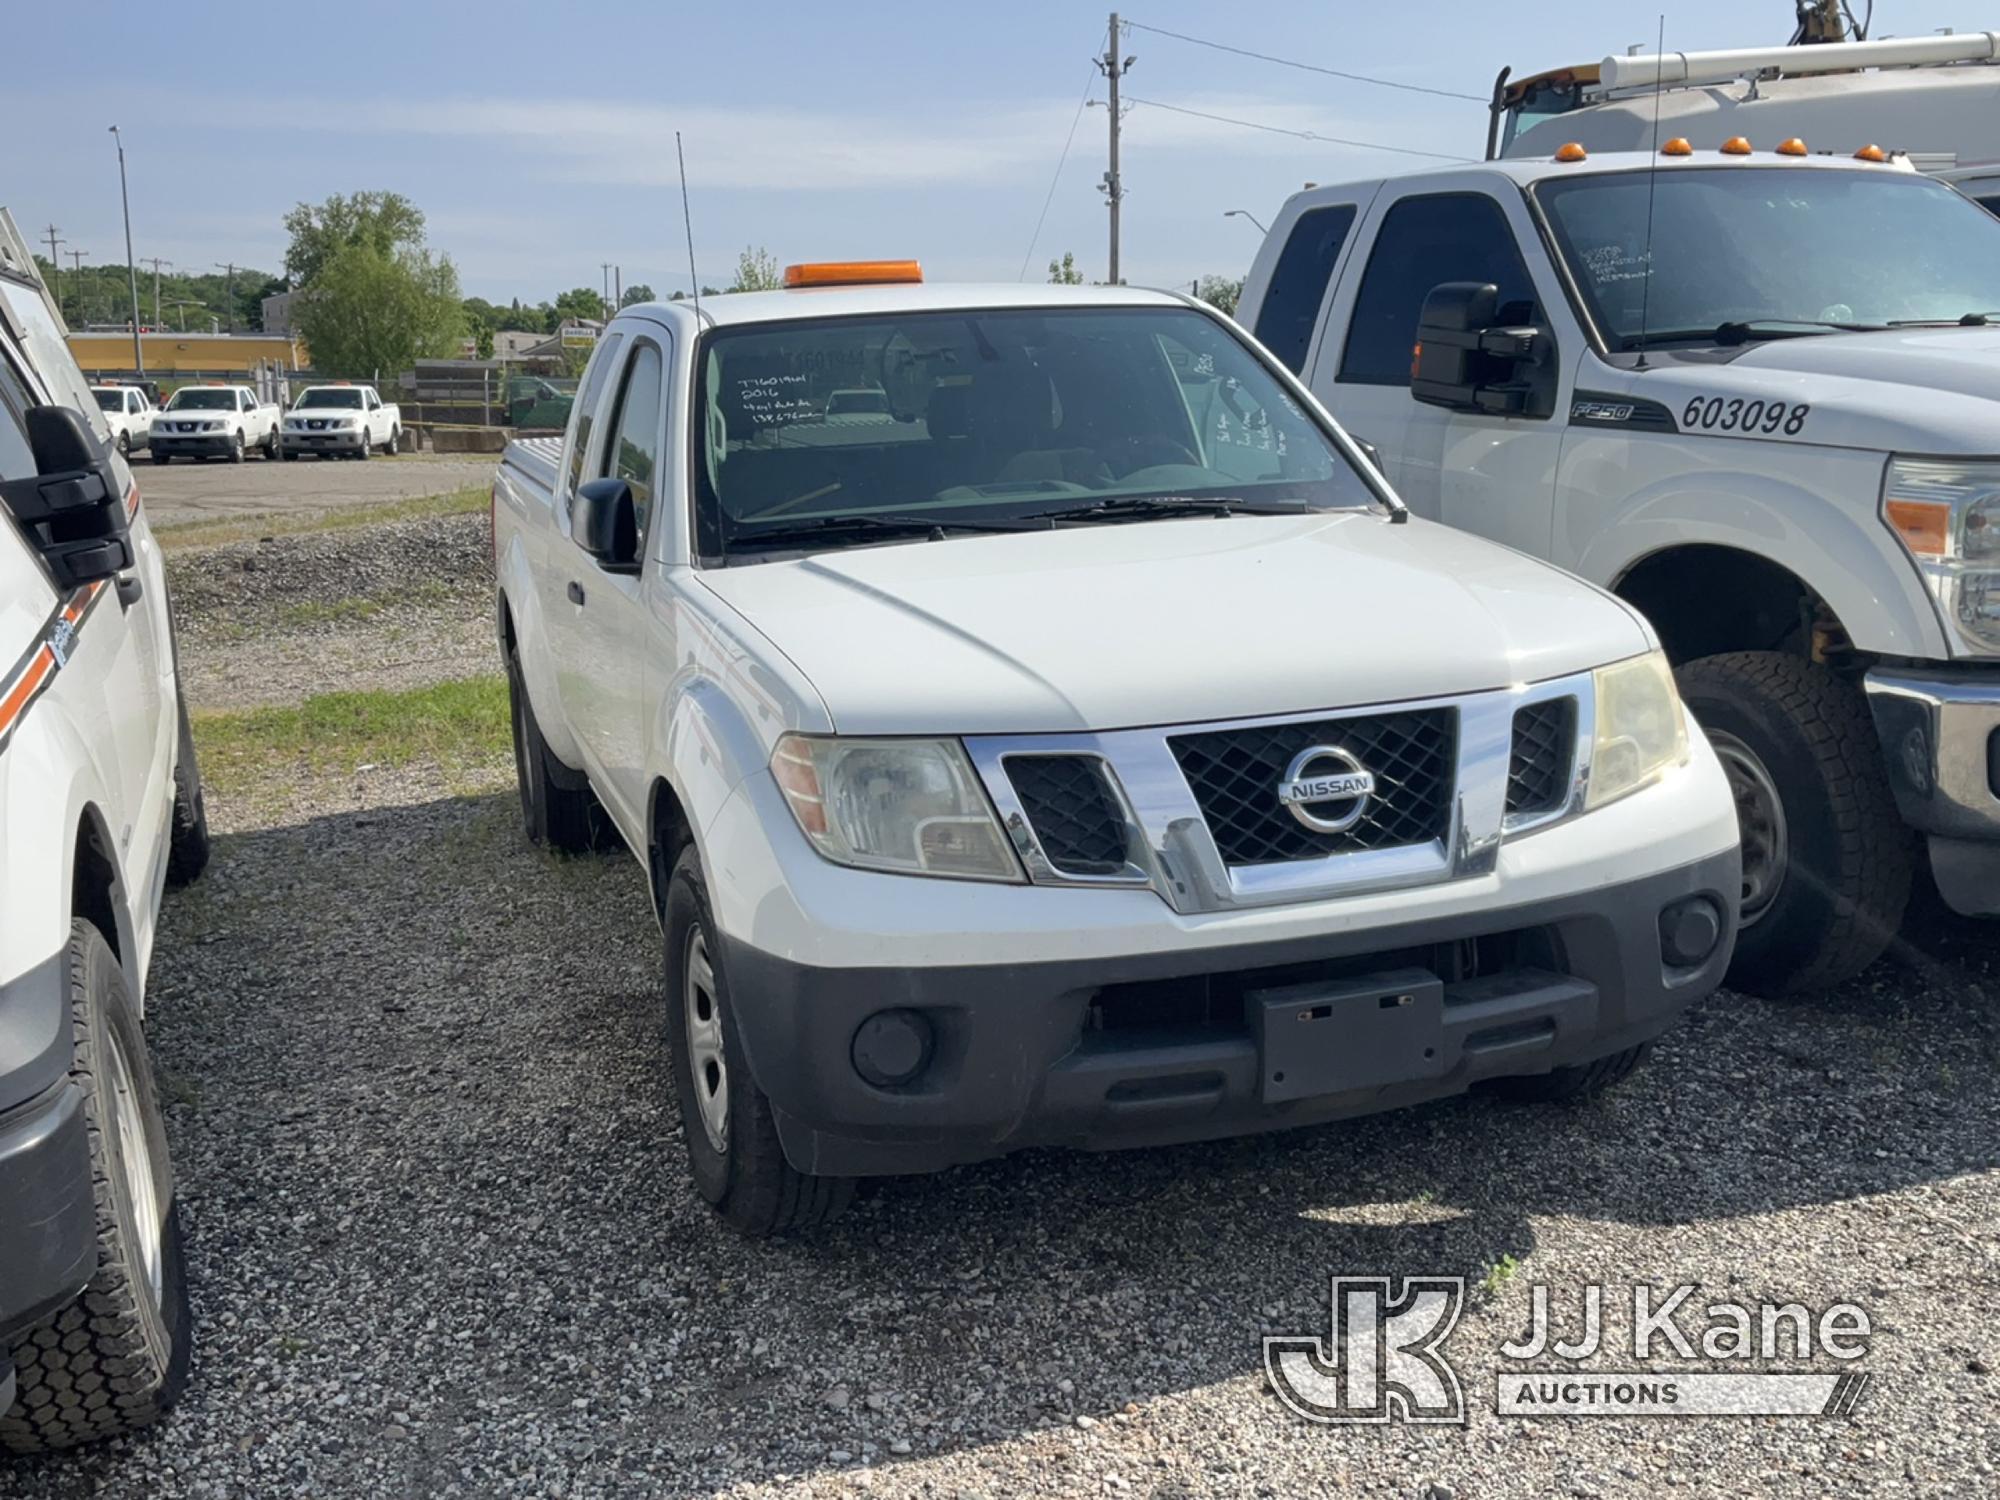 (Plymouth Meeting, PA) 2016 Nissan Frontier Extended-Cab Pickup Truck Bad Engine, Check Engine Light